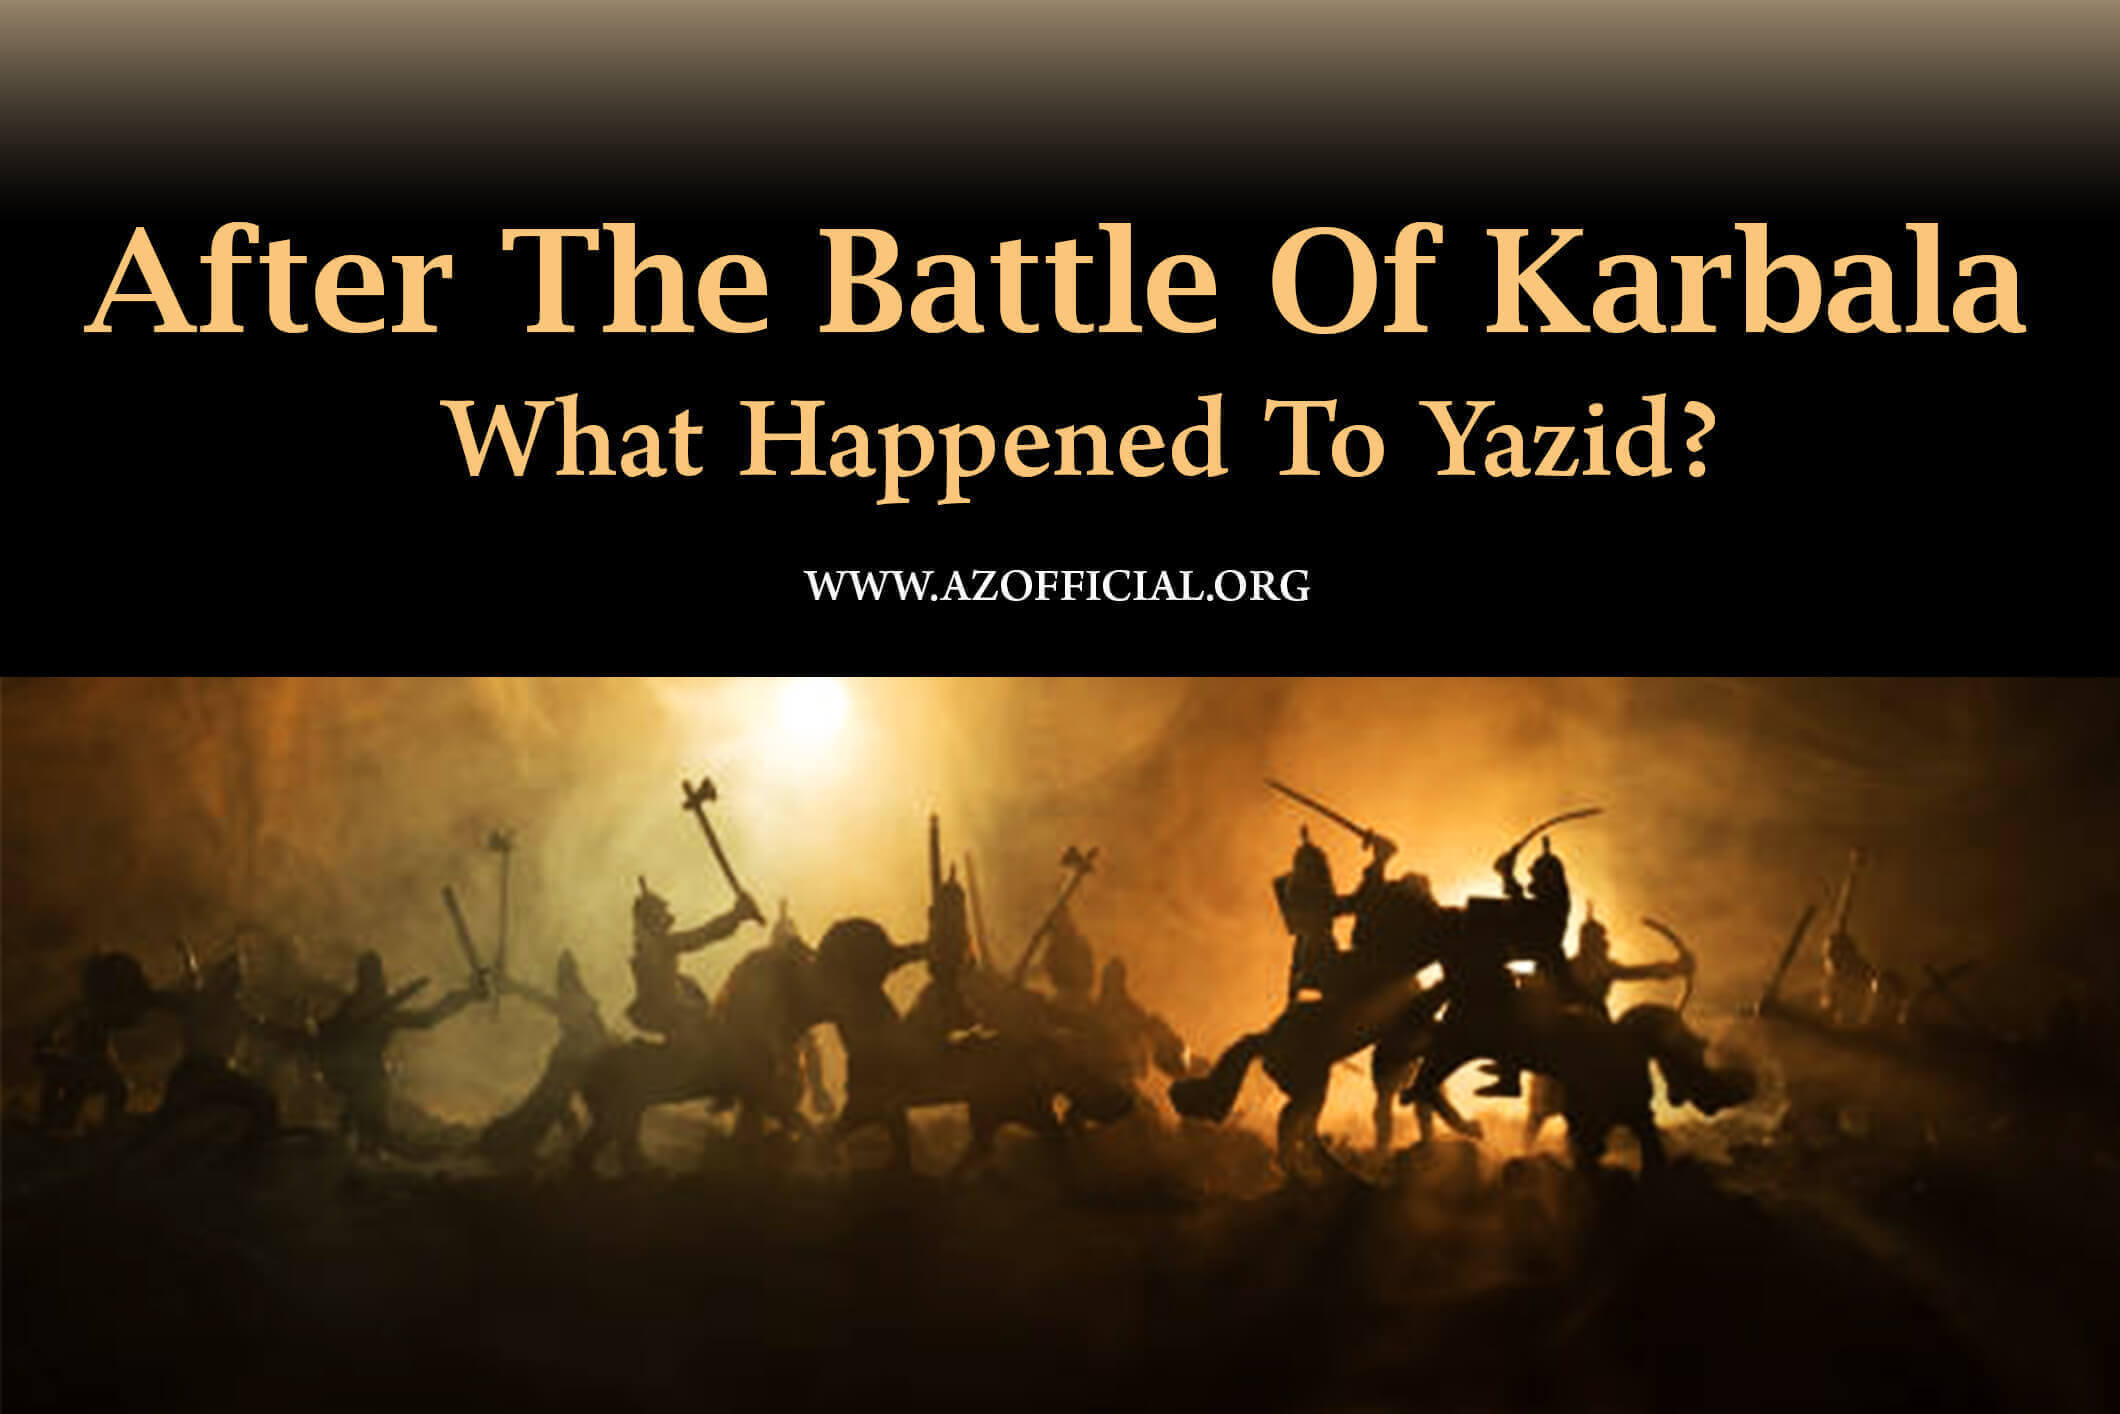 After The Battle Of Karbala, What Happened To Yazid?